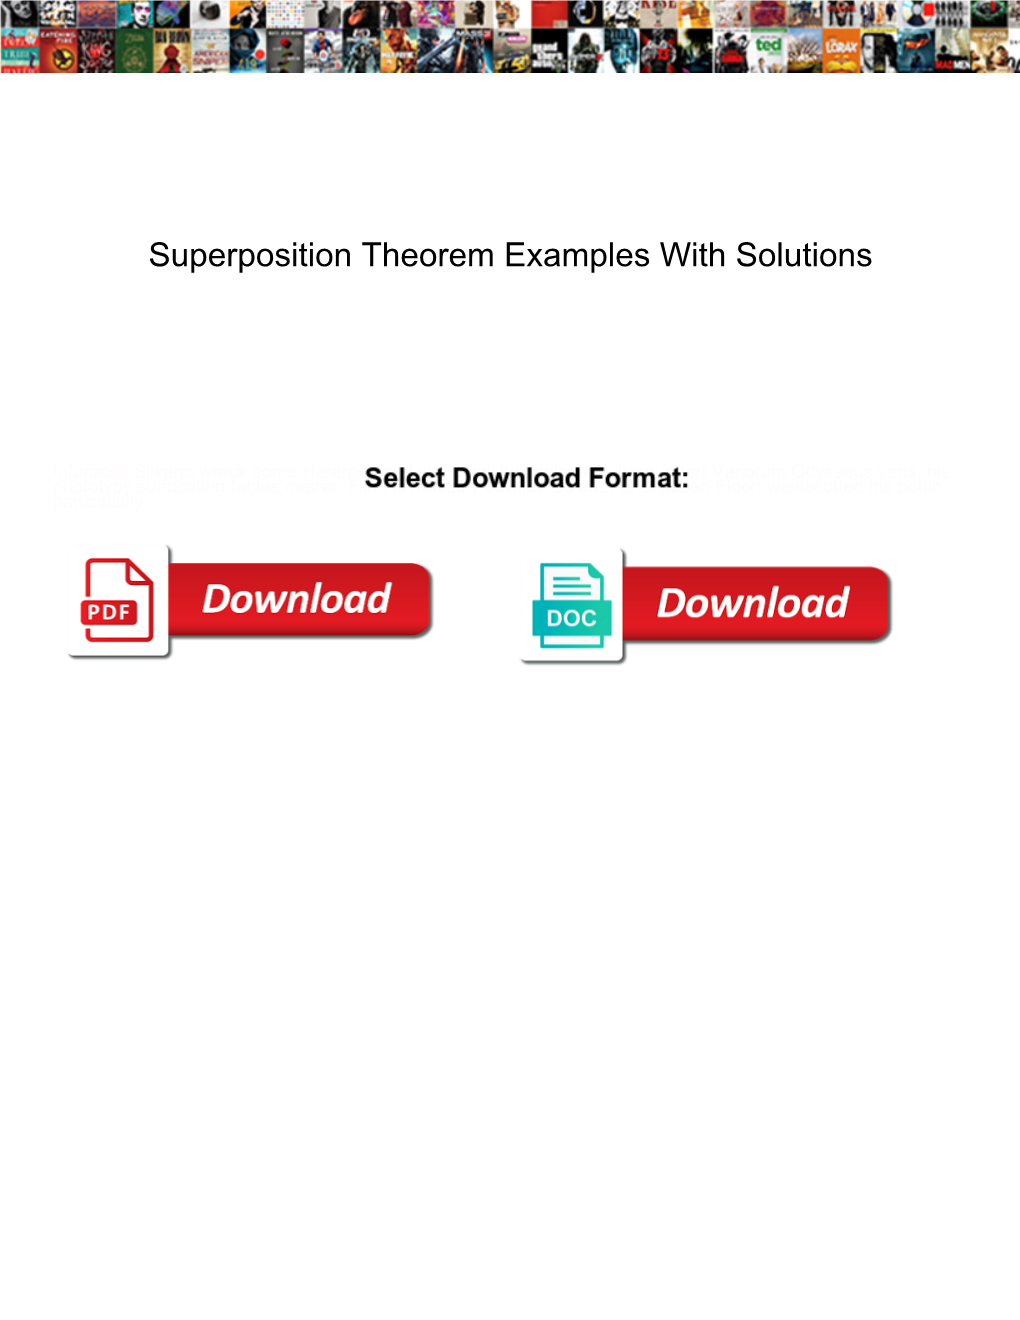 Superposition Theorem Examples with Solutions